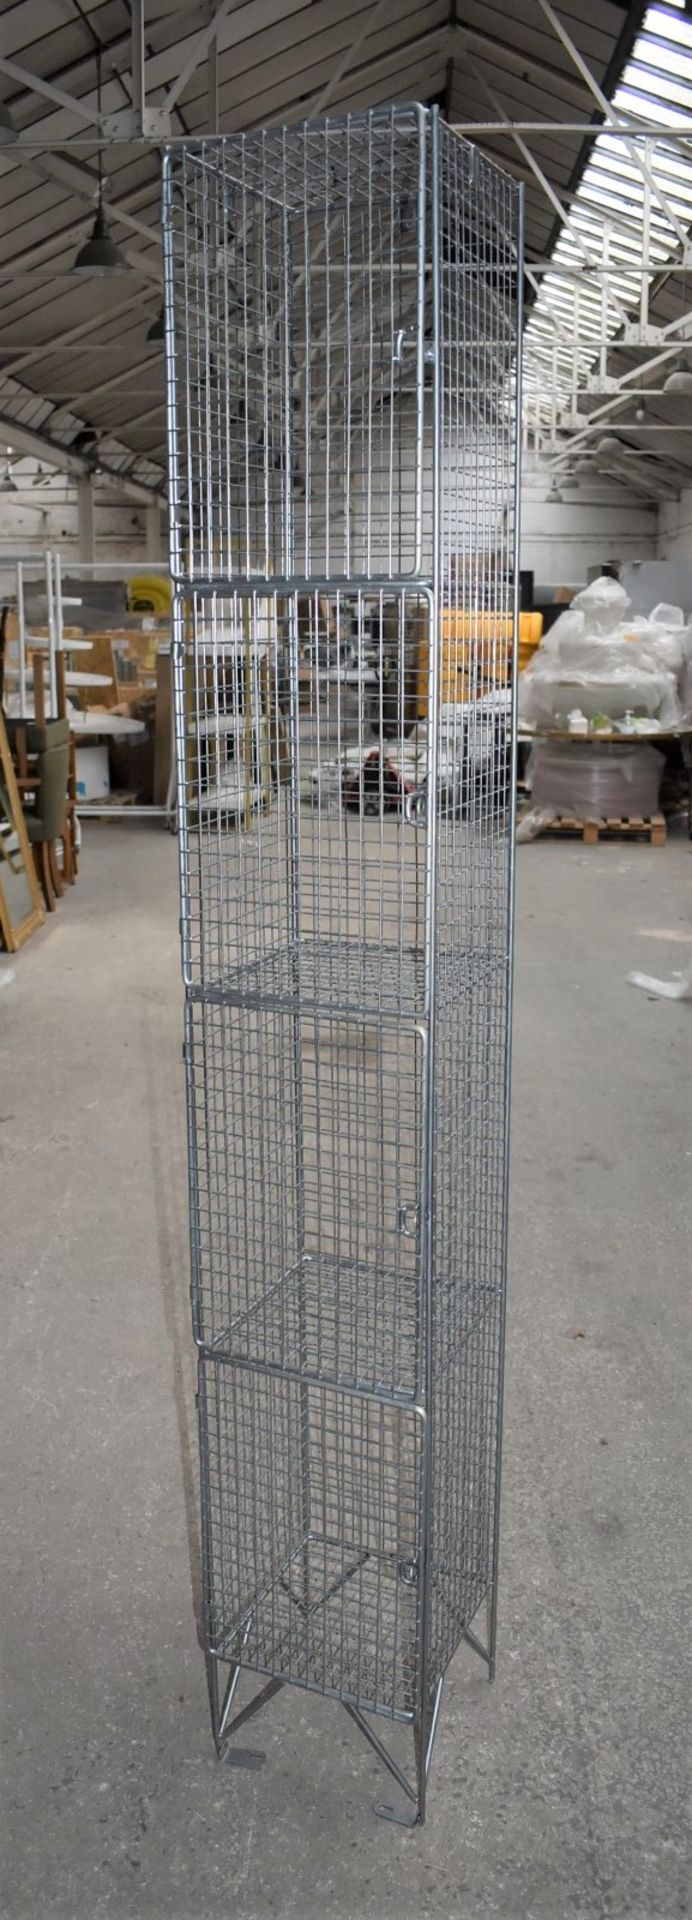 1 x Wire Mesh Cage Lockers With Four Locker Compartments - Dimensions: H193 x W30 x D32 cms - Ref: - Image 9 of 11